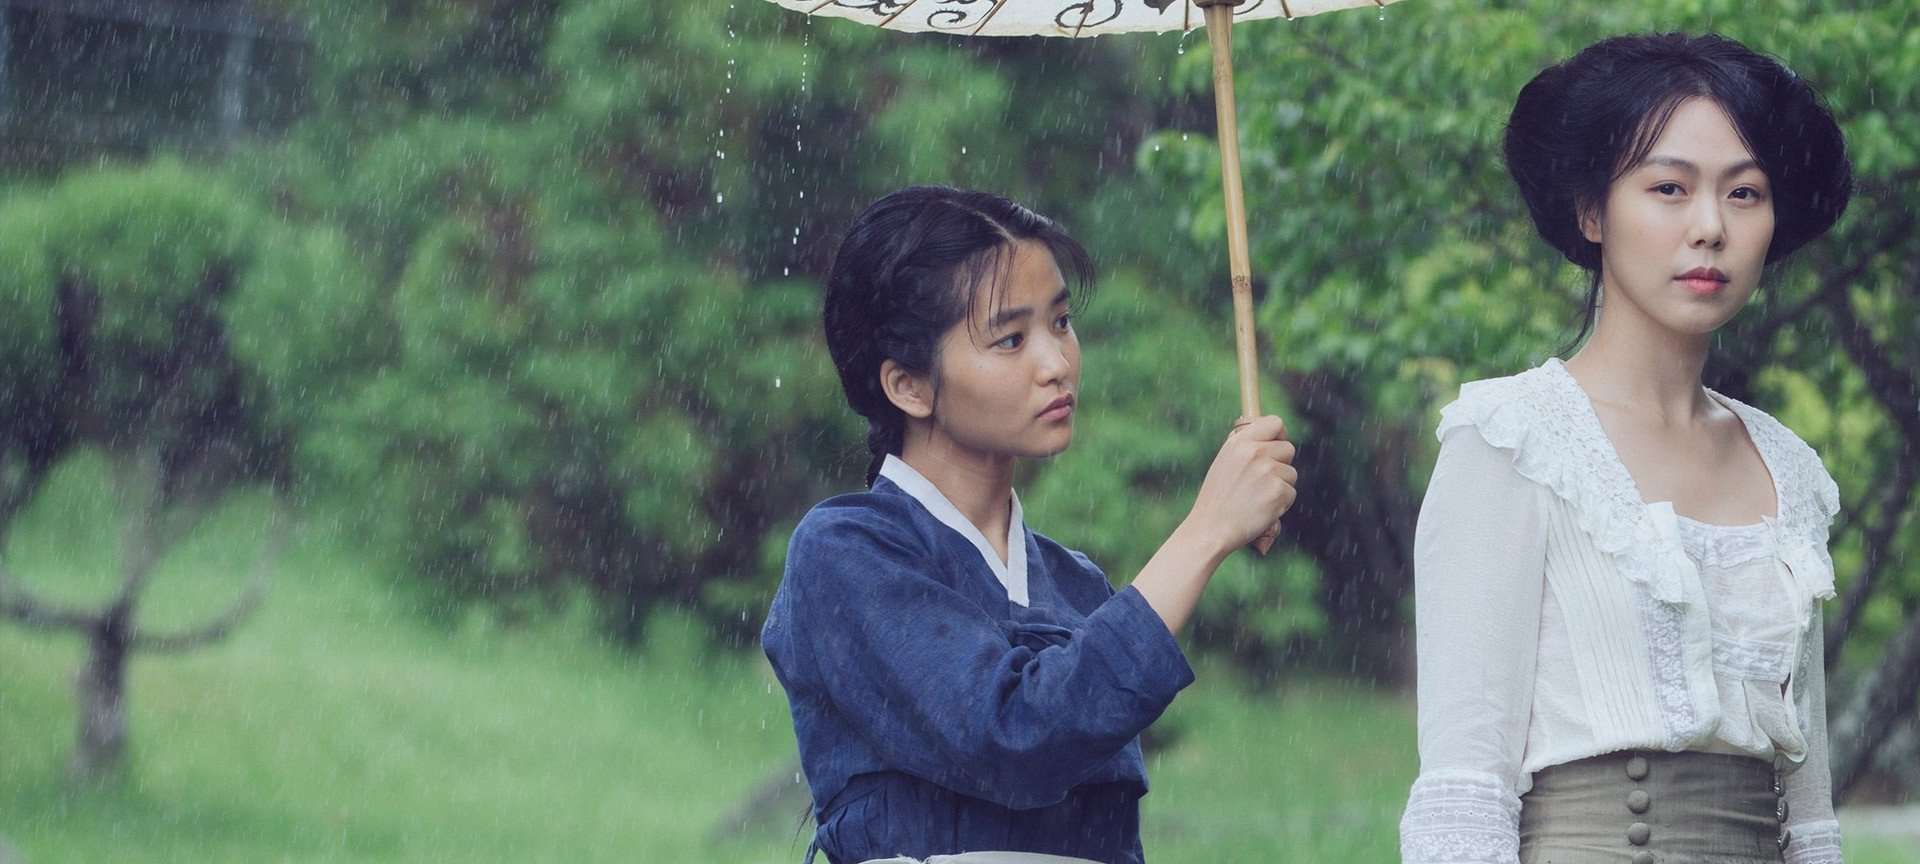 The Japanese heiress and her Handmaiden from the film The Handmaiden standing in a green area with the handmaiden holding an umbrella over the heiress.